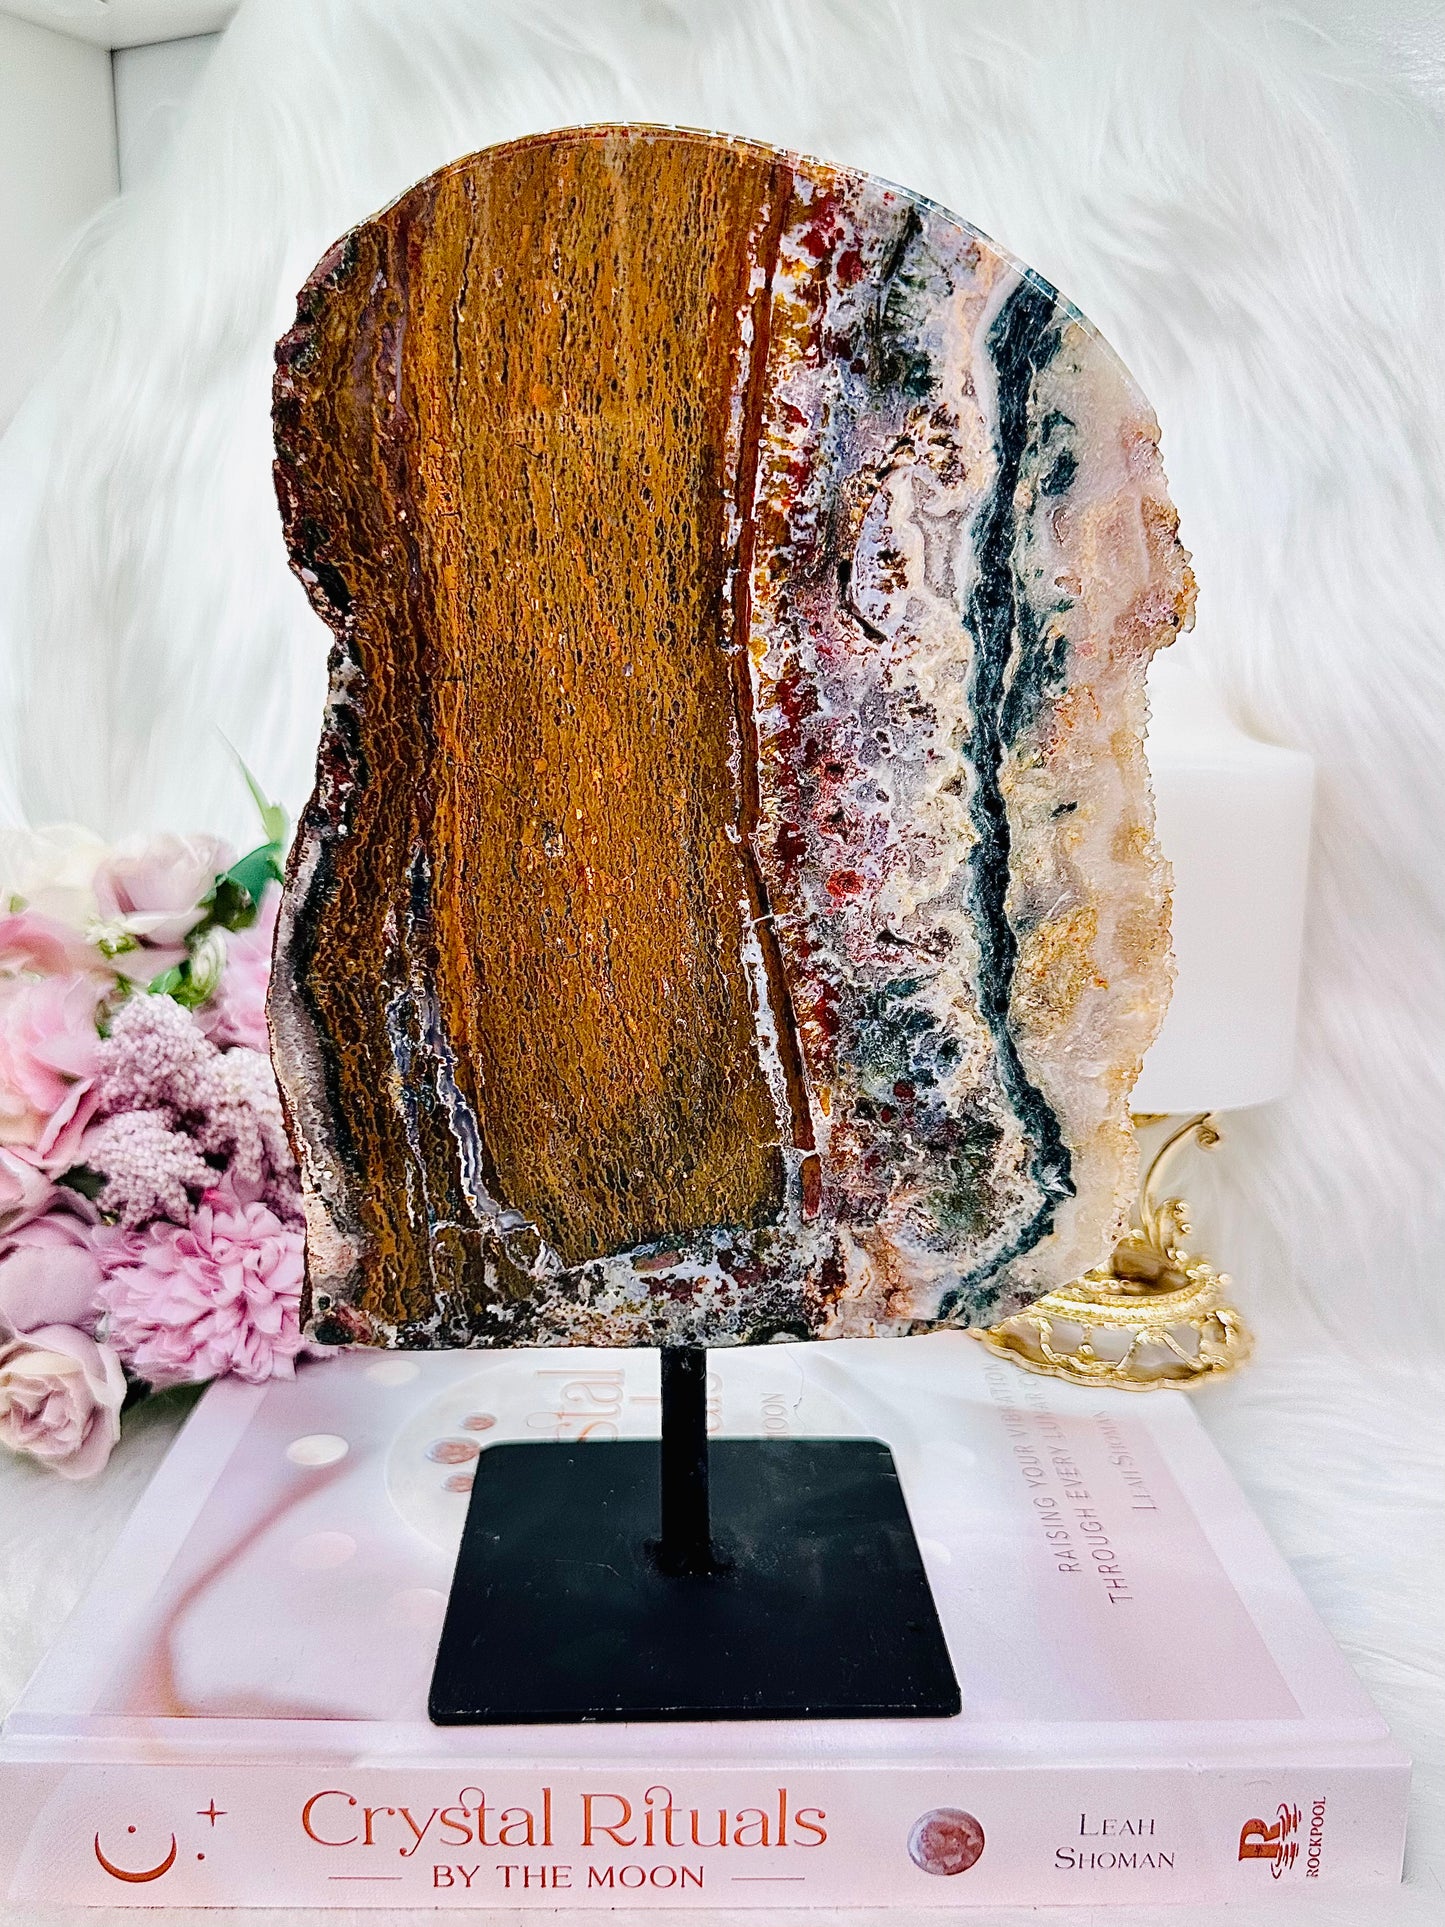 Uniquely Incredible!!!! Absolutely Amazing Large 23cm 1.18KG Colourful Jasper Slab On Stand ~ A Truly Amazing Piece